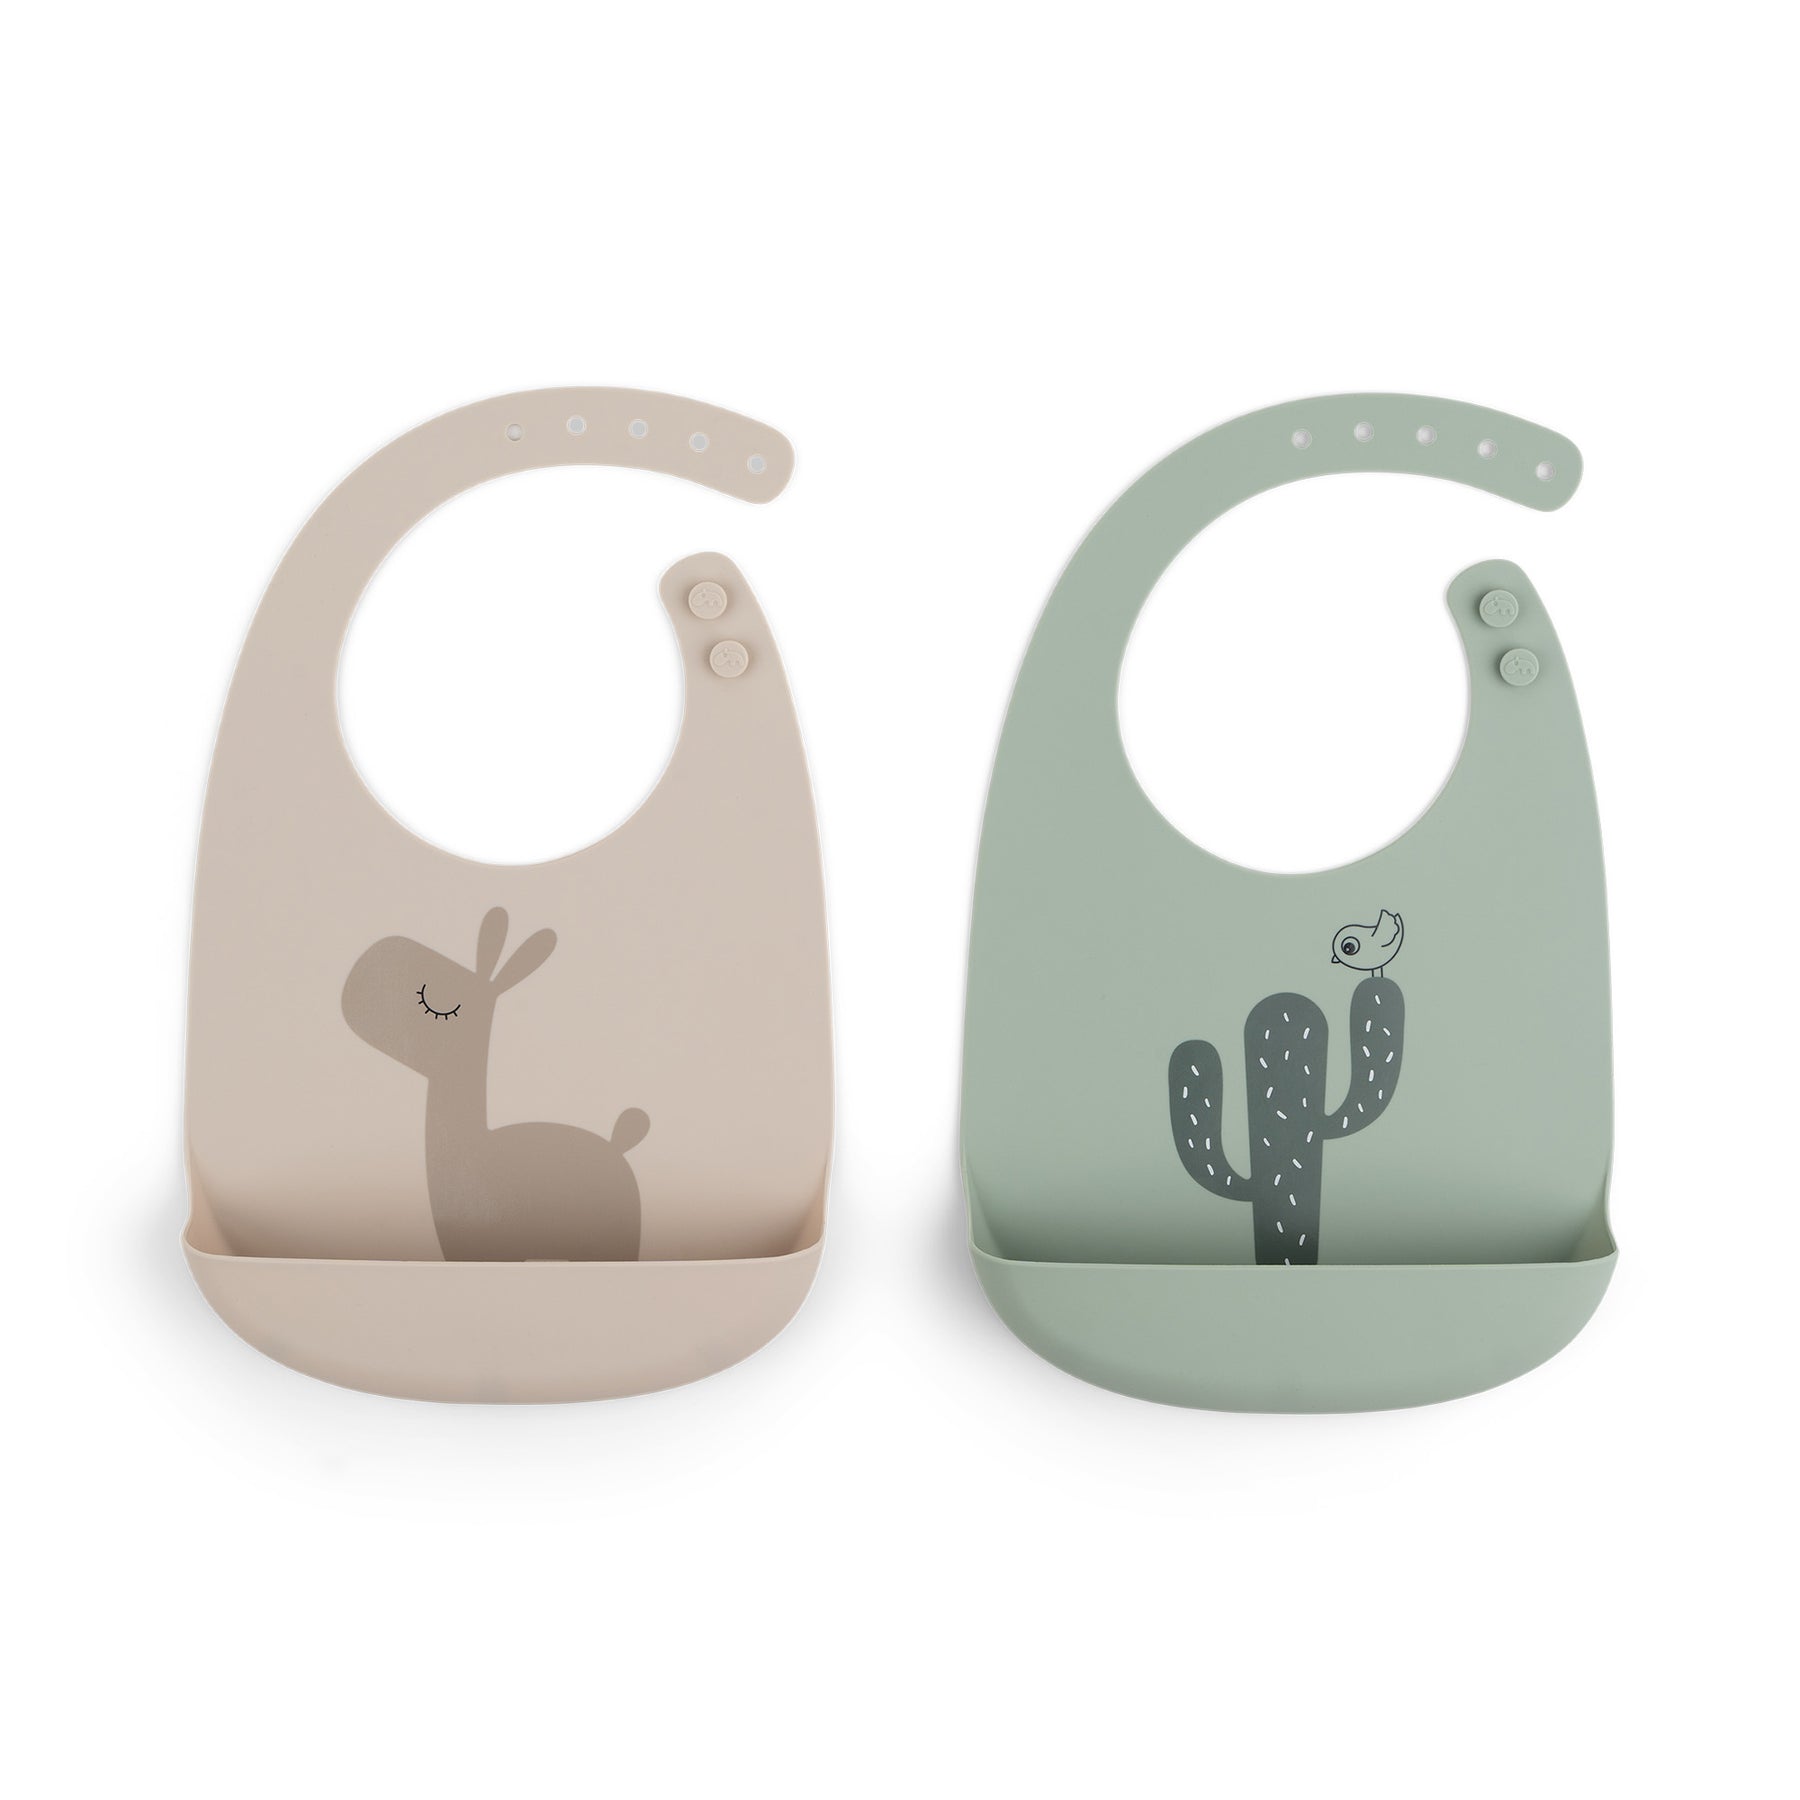 Silicone bib 2-pack - Lalee - Sand/Green - Front